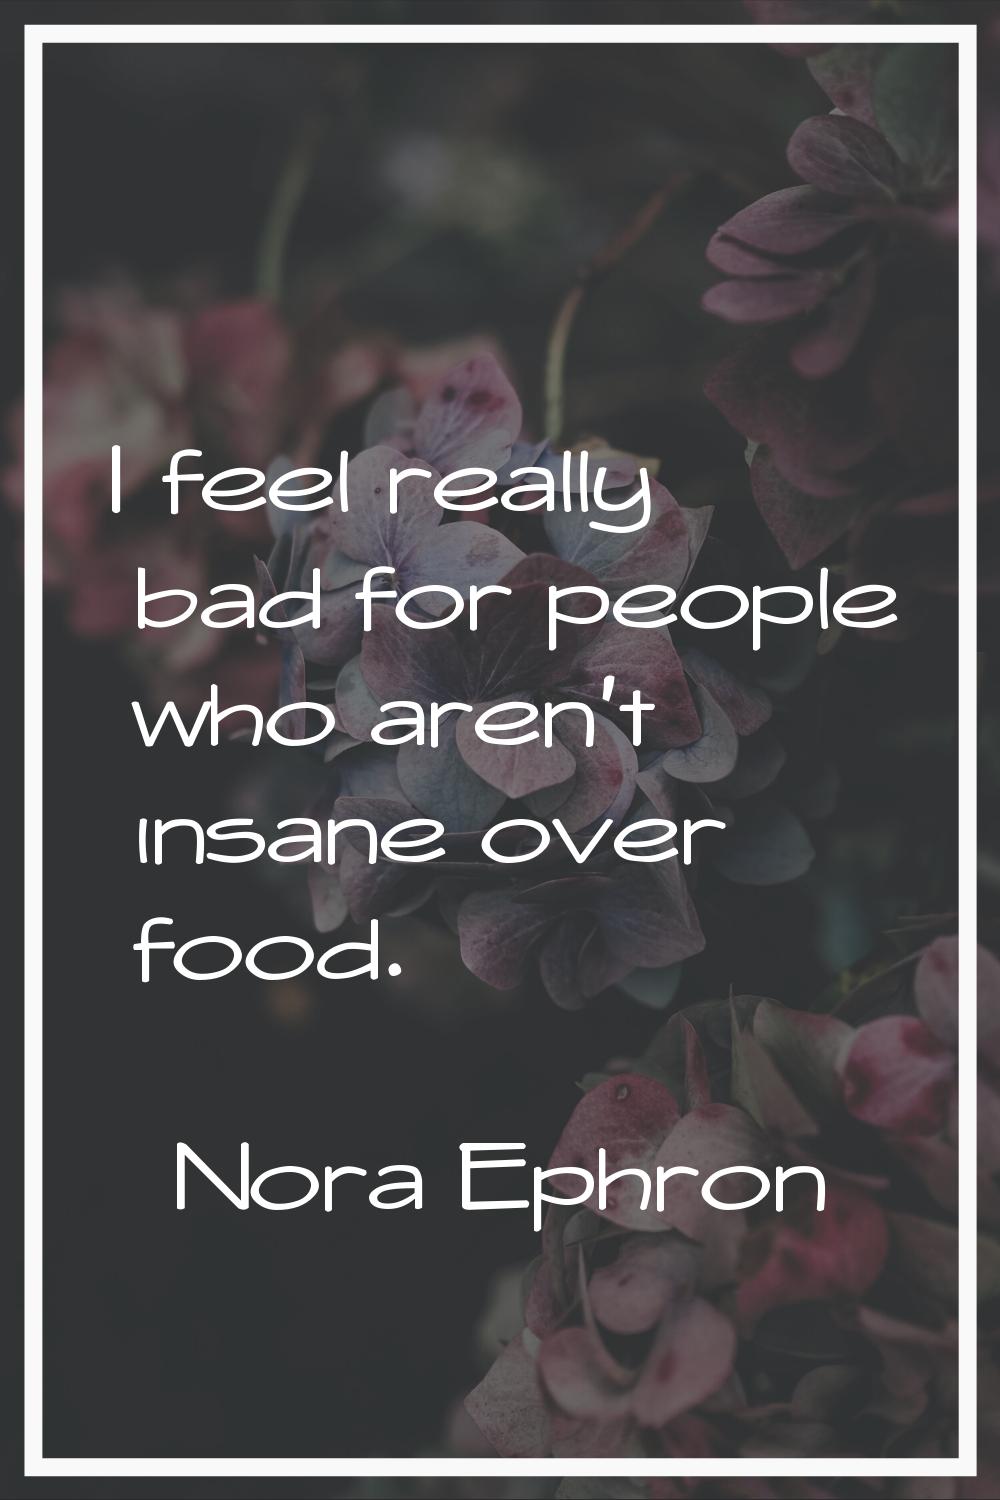 I feel really bad for people who aren't insane over food.